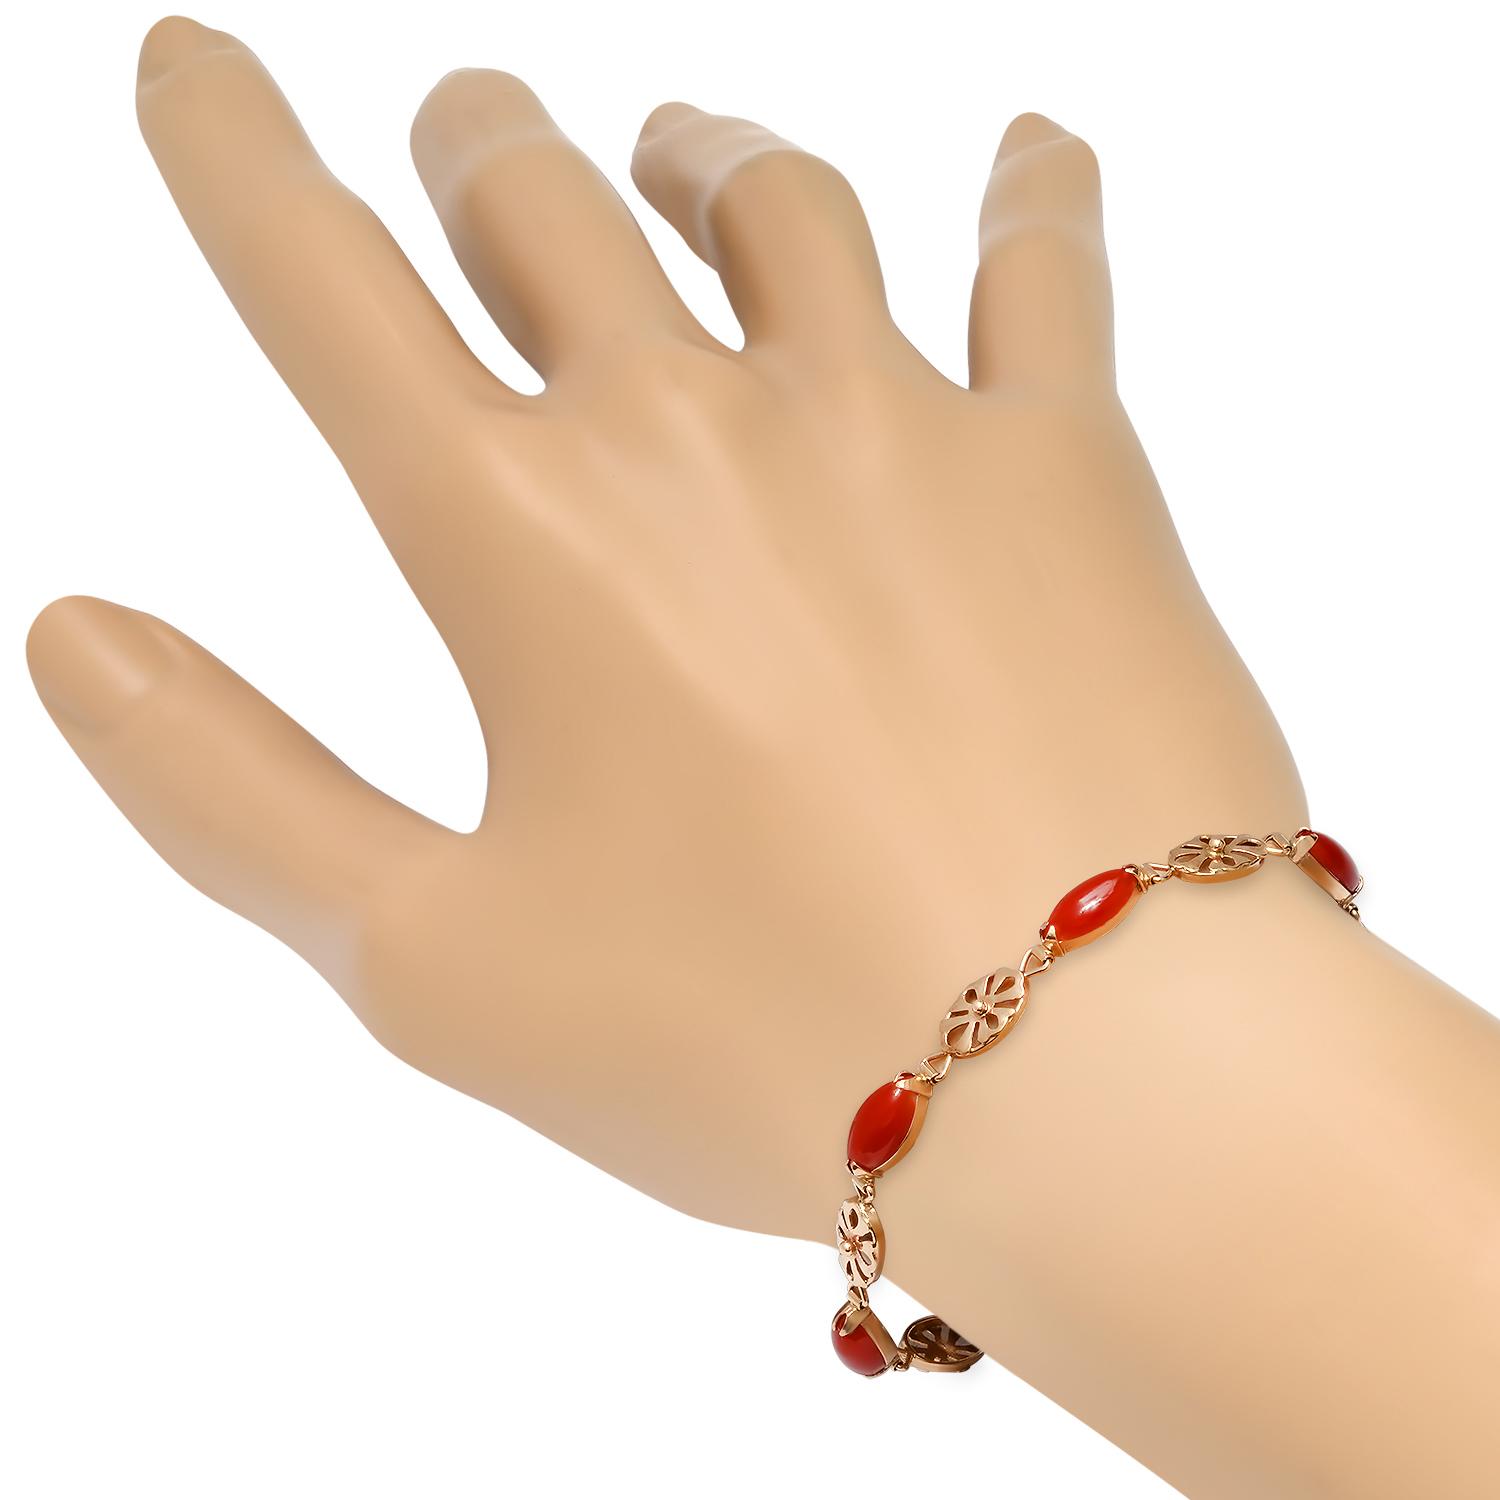 14K Yellow Gold Setting with 10.92ct Coral Ladies Bracelet